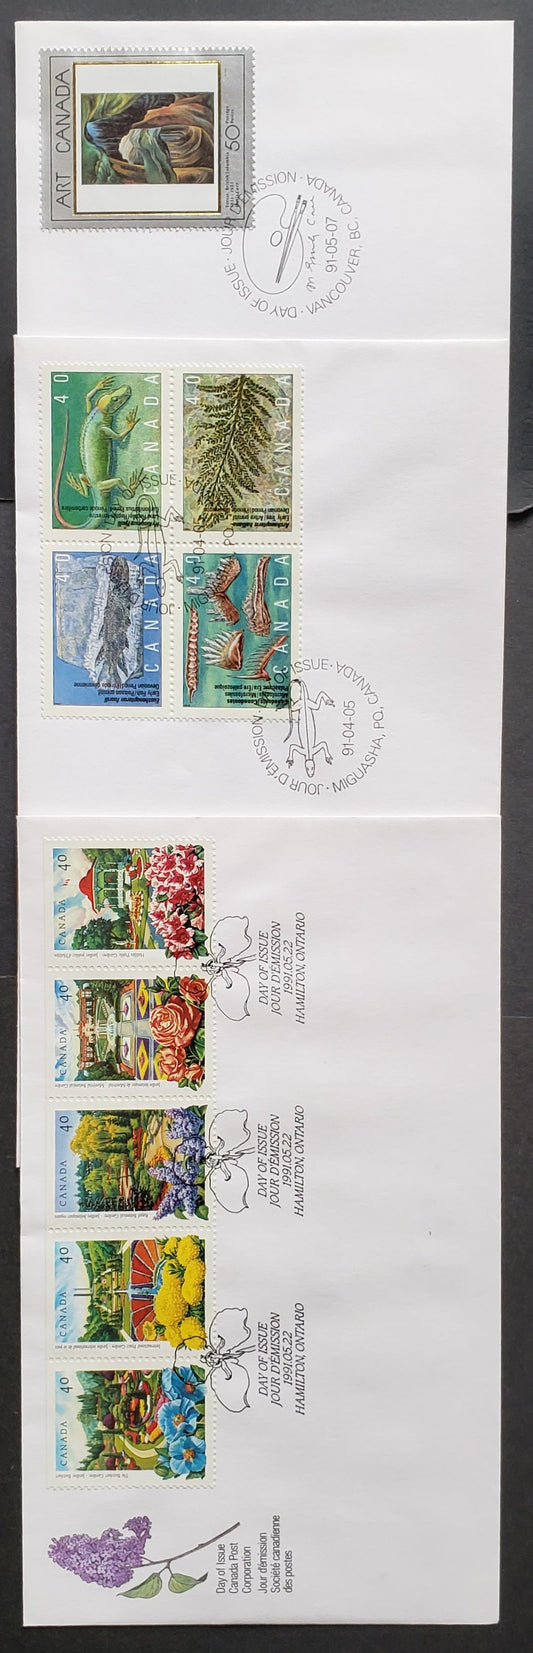 Lot 99 Canada #1309a, 1310, 1315a 40c & 50c Multicolor 1991 Prehistoric Life - Public Gardens, 3 Canada Post FDC's Franked With Single, Strip Of 5 & Block Of 4, Approx 40,000-50,000 Of Each Produced, Cat. Value $9.7